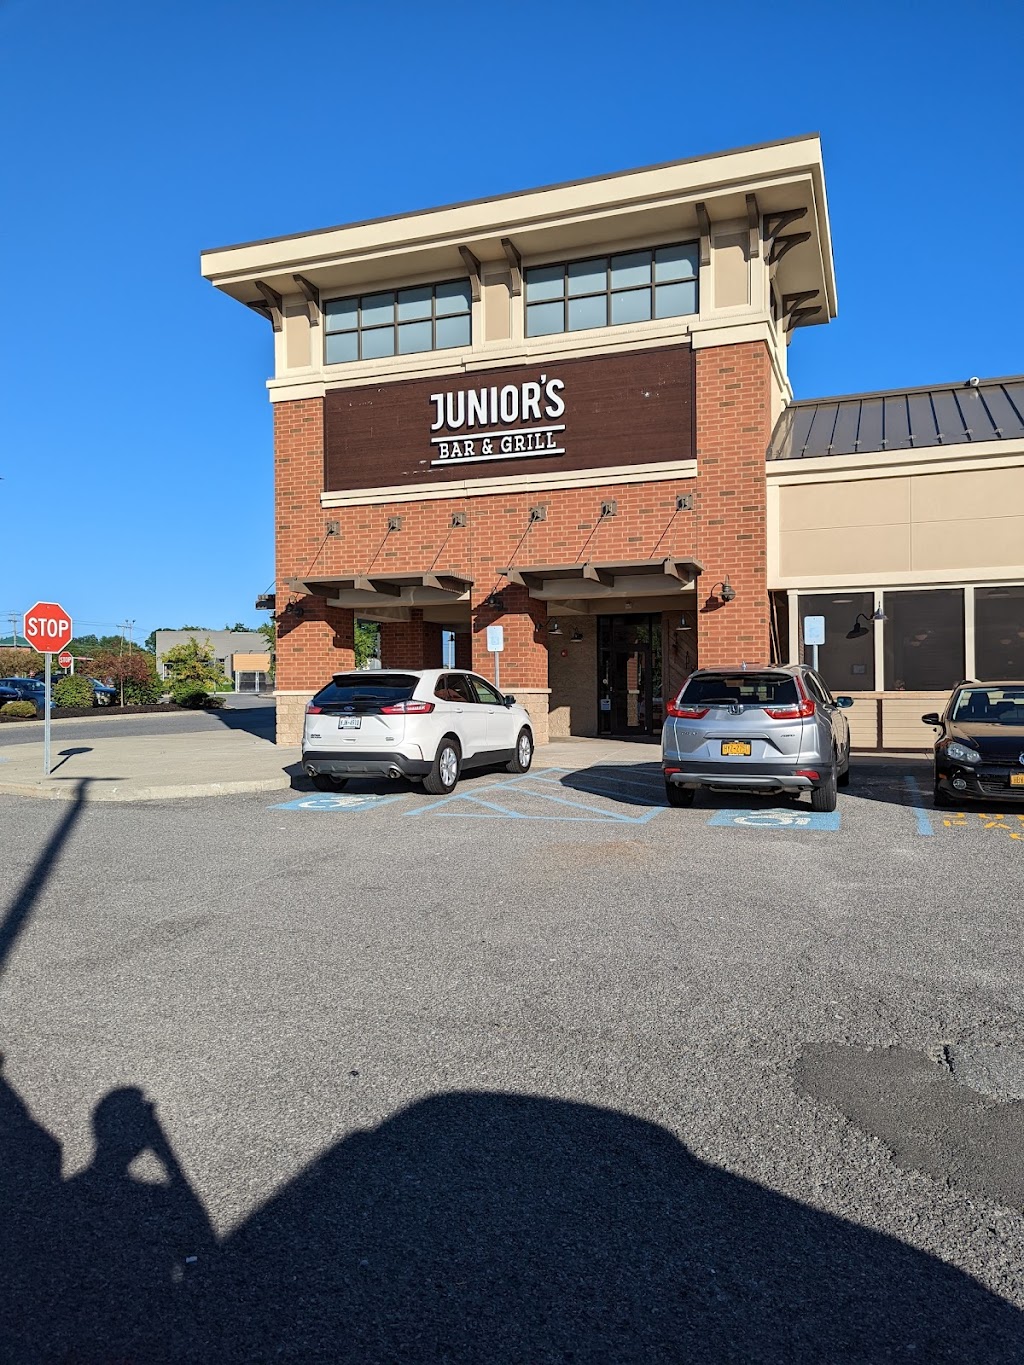 Juniors Bar and Grill | restaurant | 2080 Western Ave, Guilderland, NY 12084, USA | 5188989620 OR +1 518-898-9620